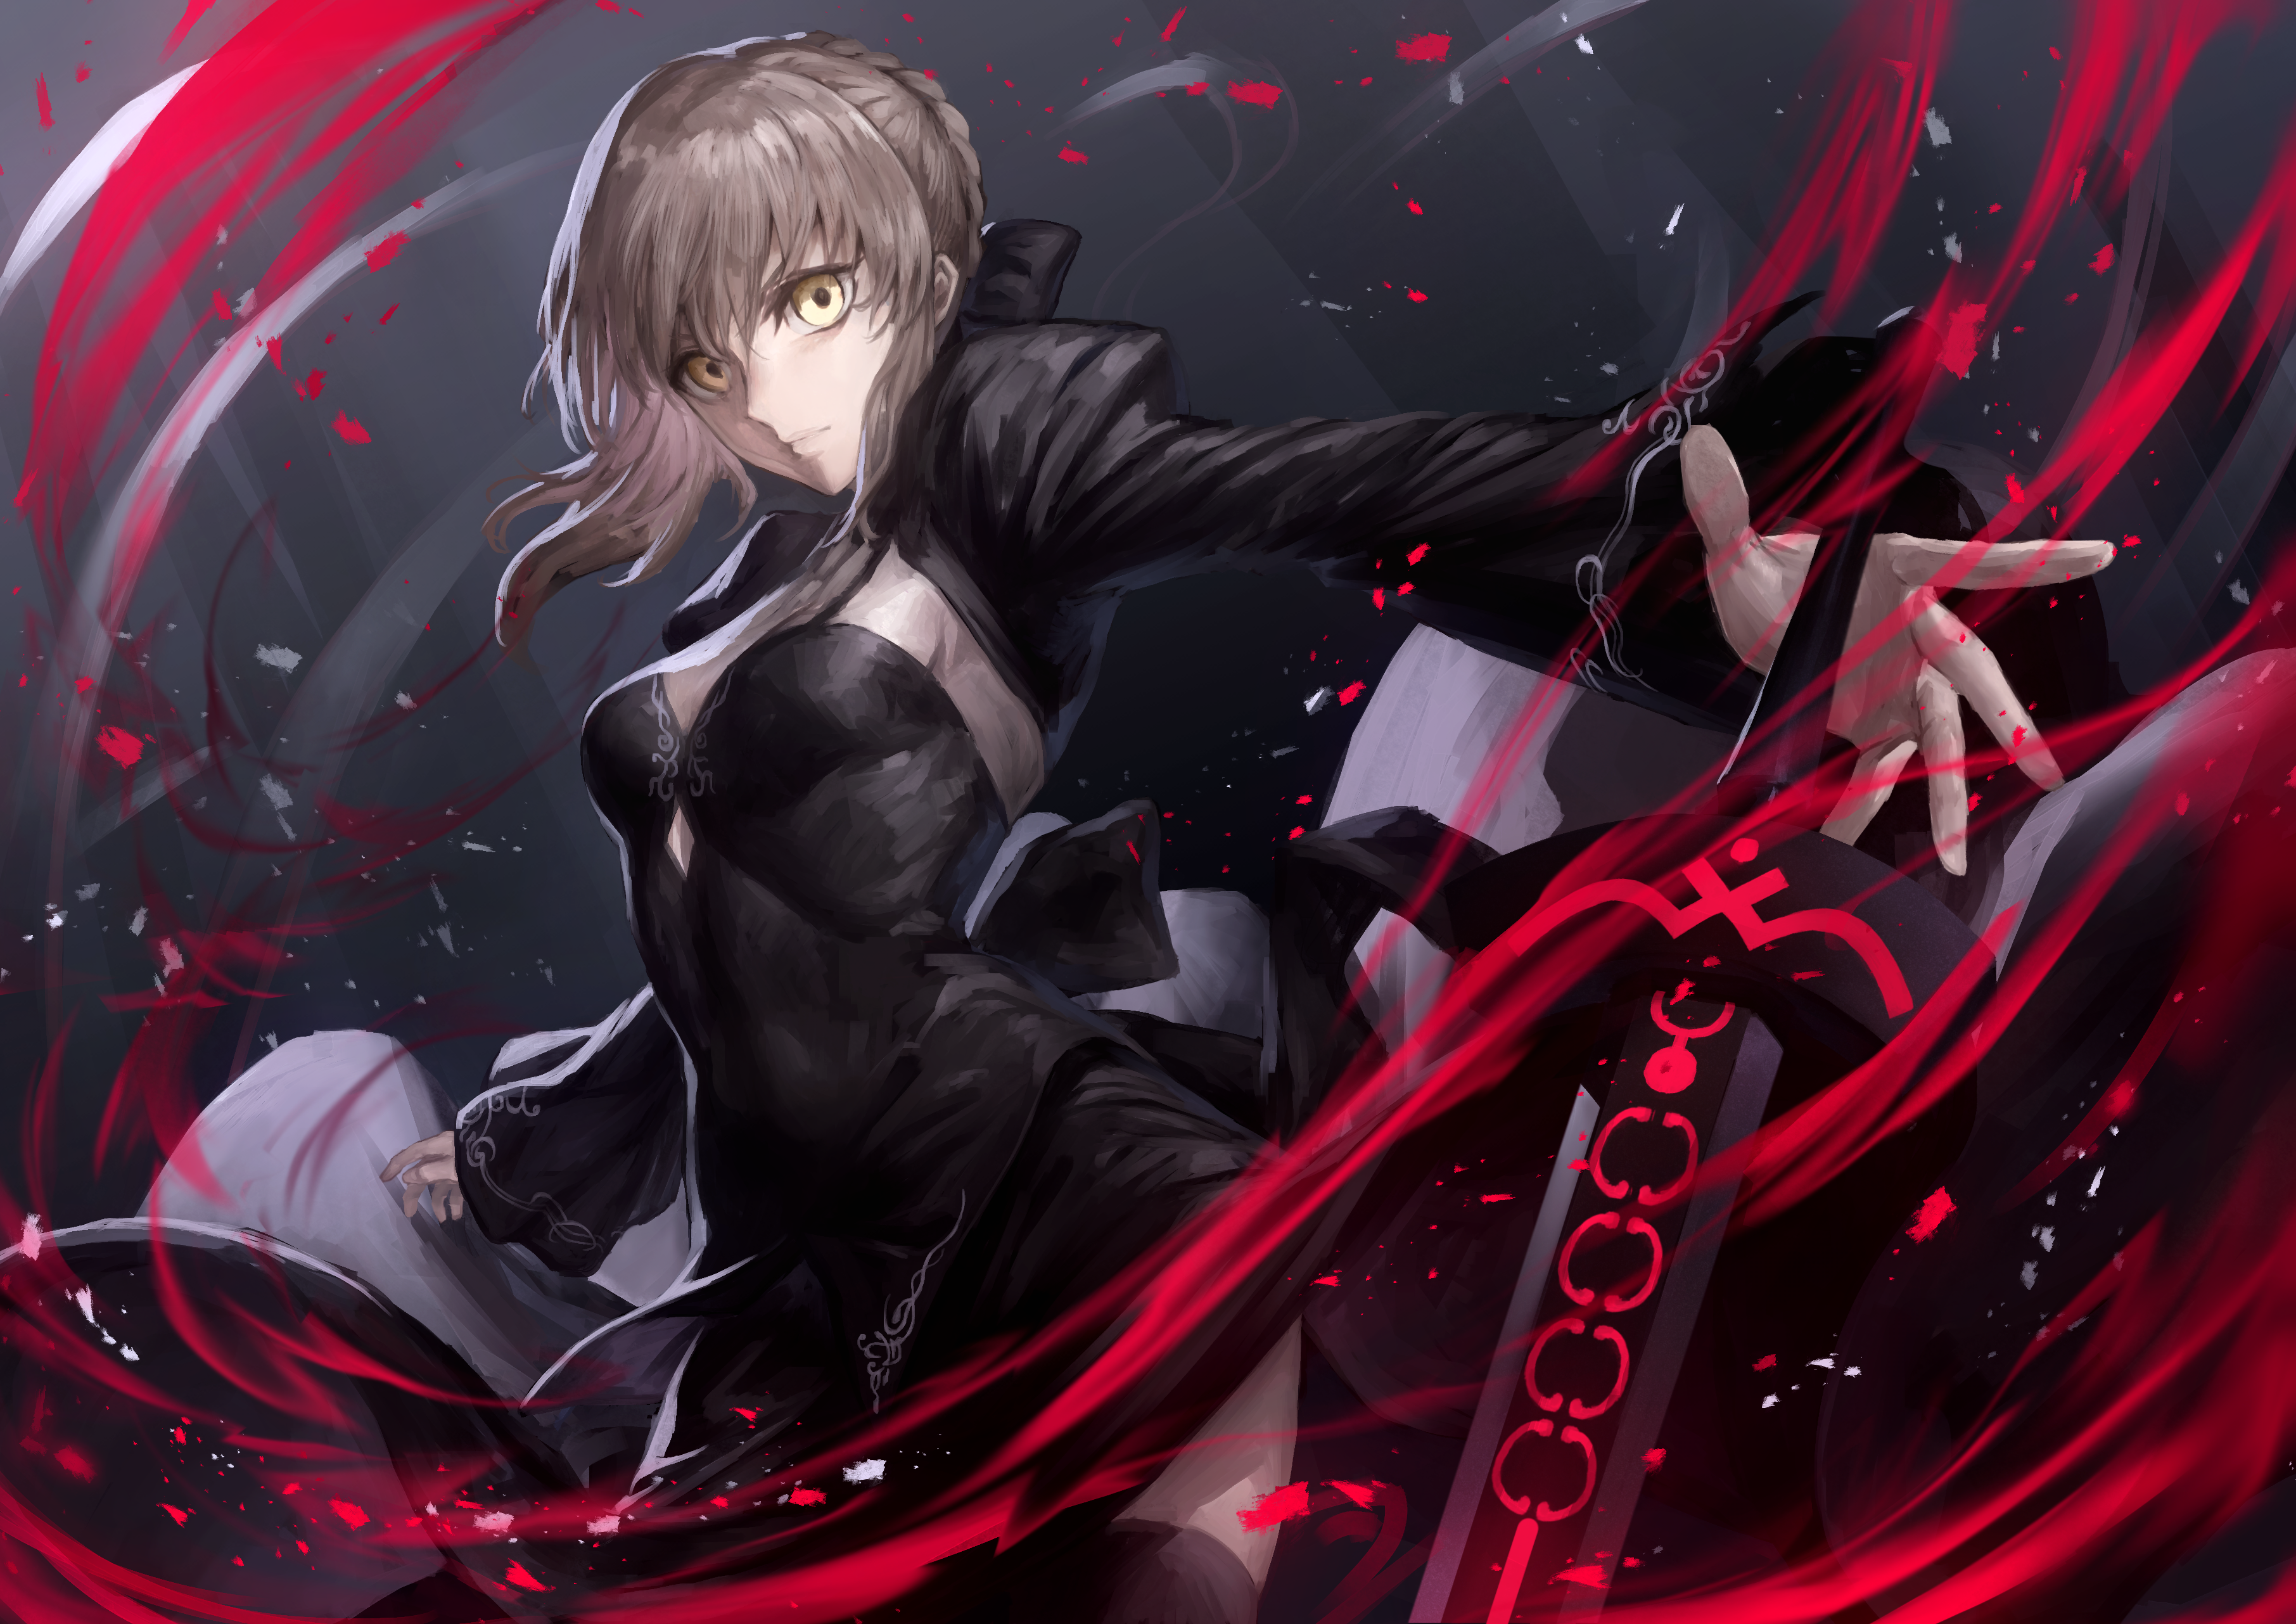 Anime 3624x2563 anime girls anime Fate/Grand Order Saber Alter peperon Fate/Stay Night fate/stay night: heaven's feel Fate series black dress red